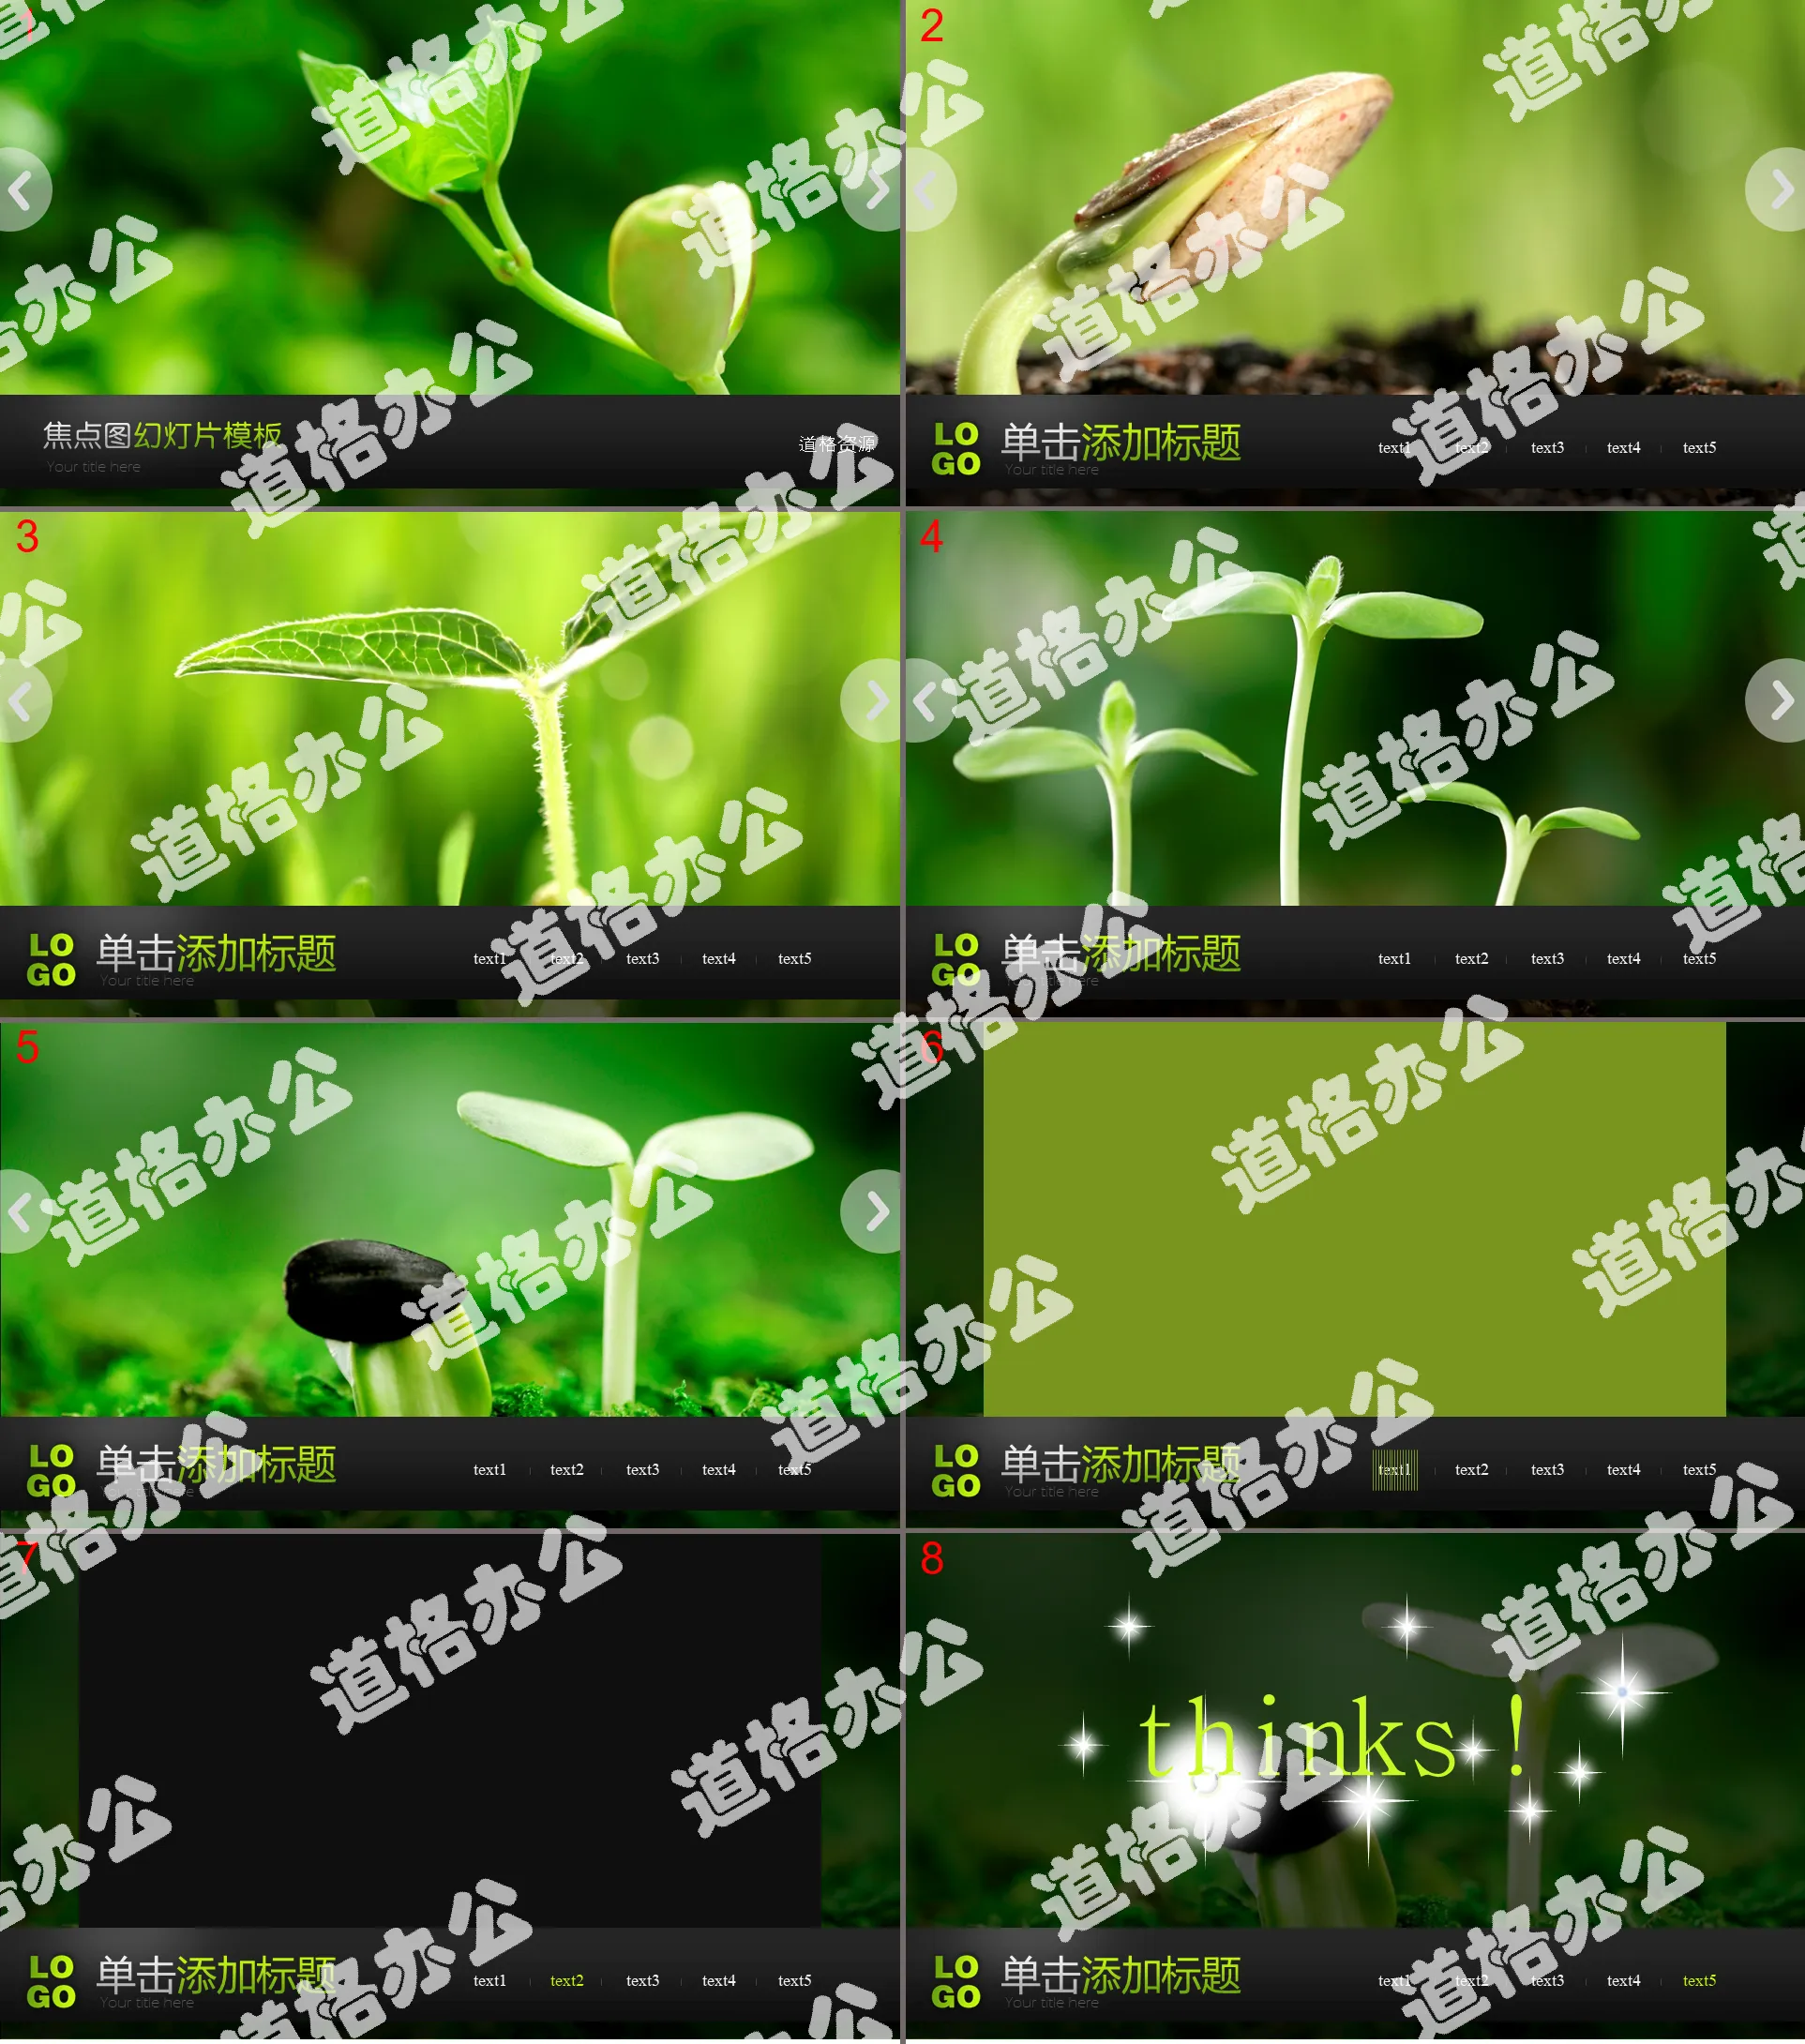 Plant slide template download with dynamic green seedlings and bean sprouts background